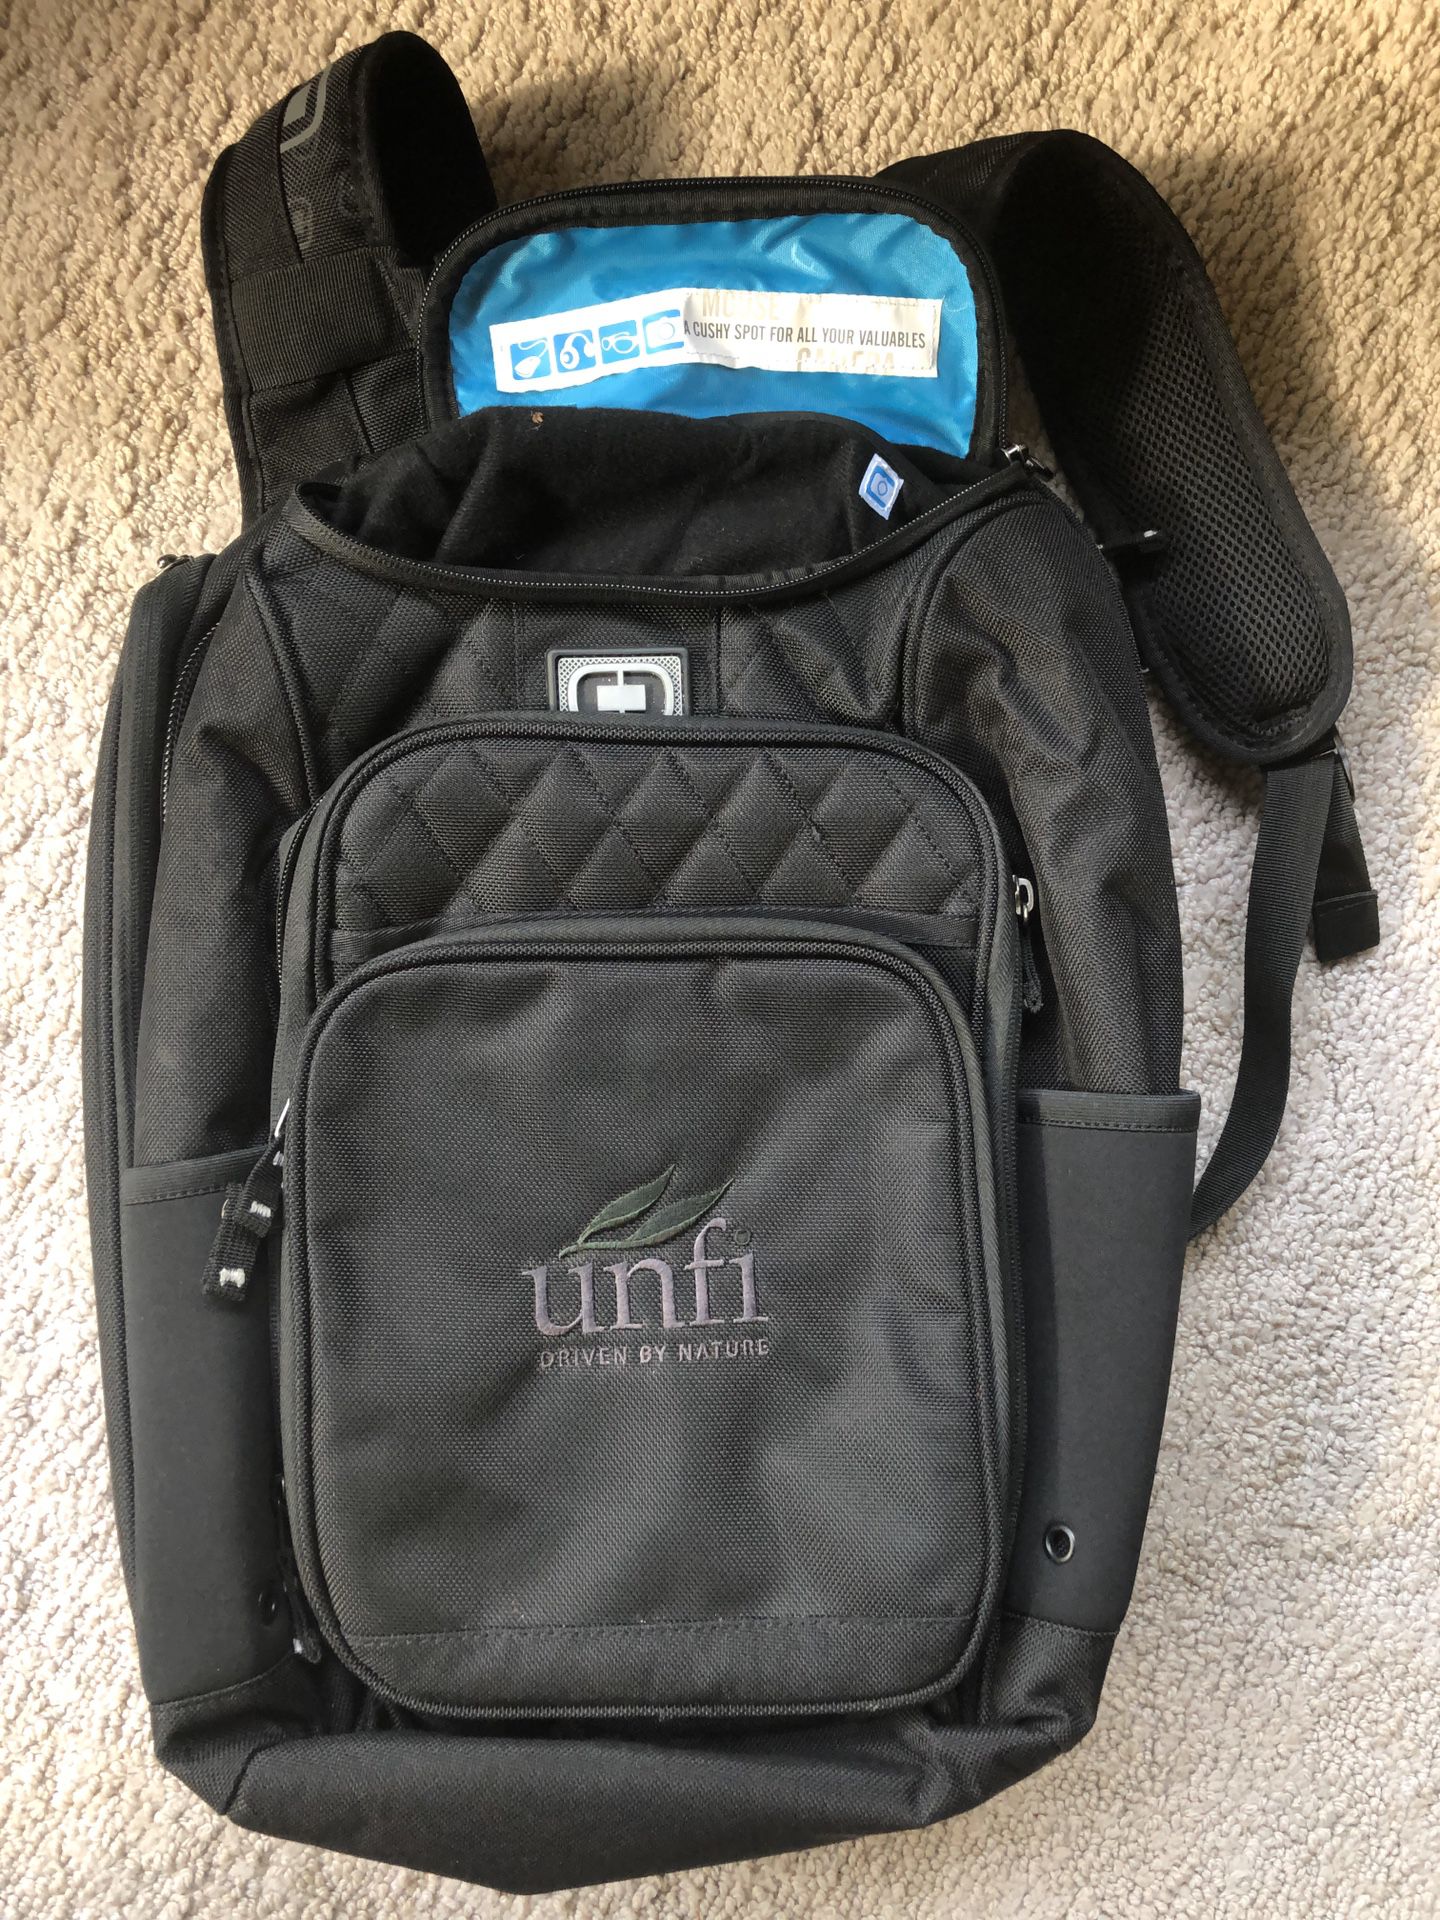 Unfi laptop/electronics carrying case/backpack